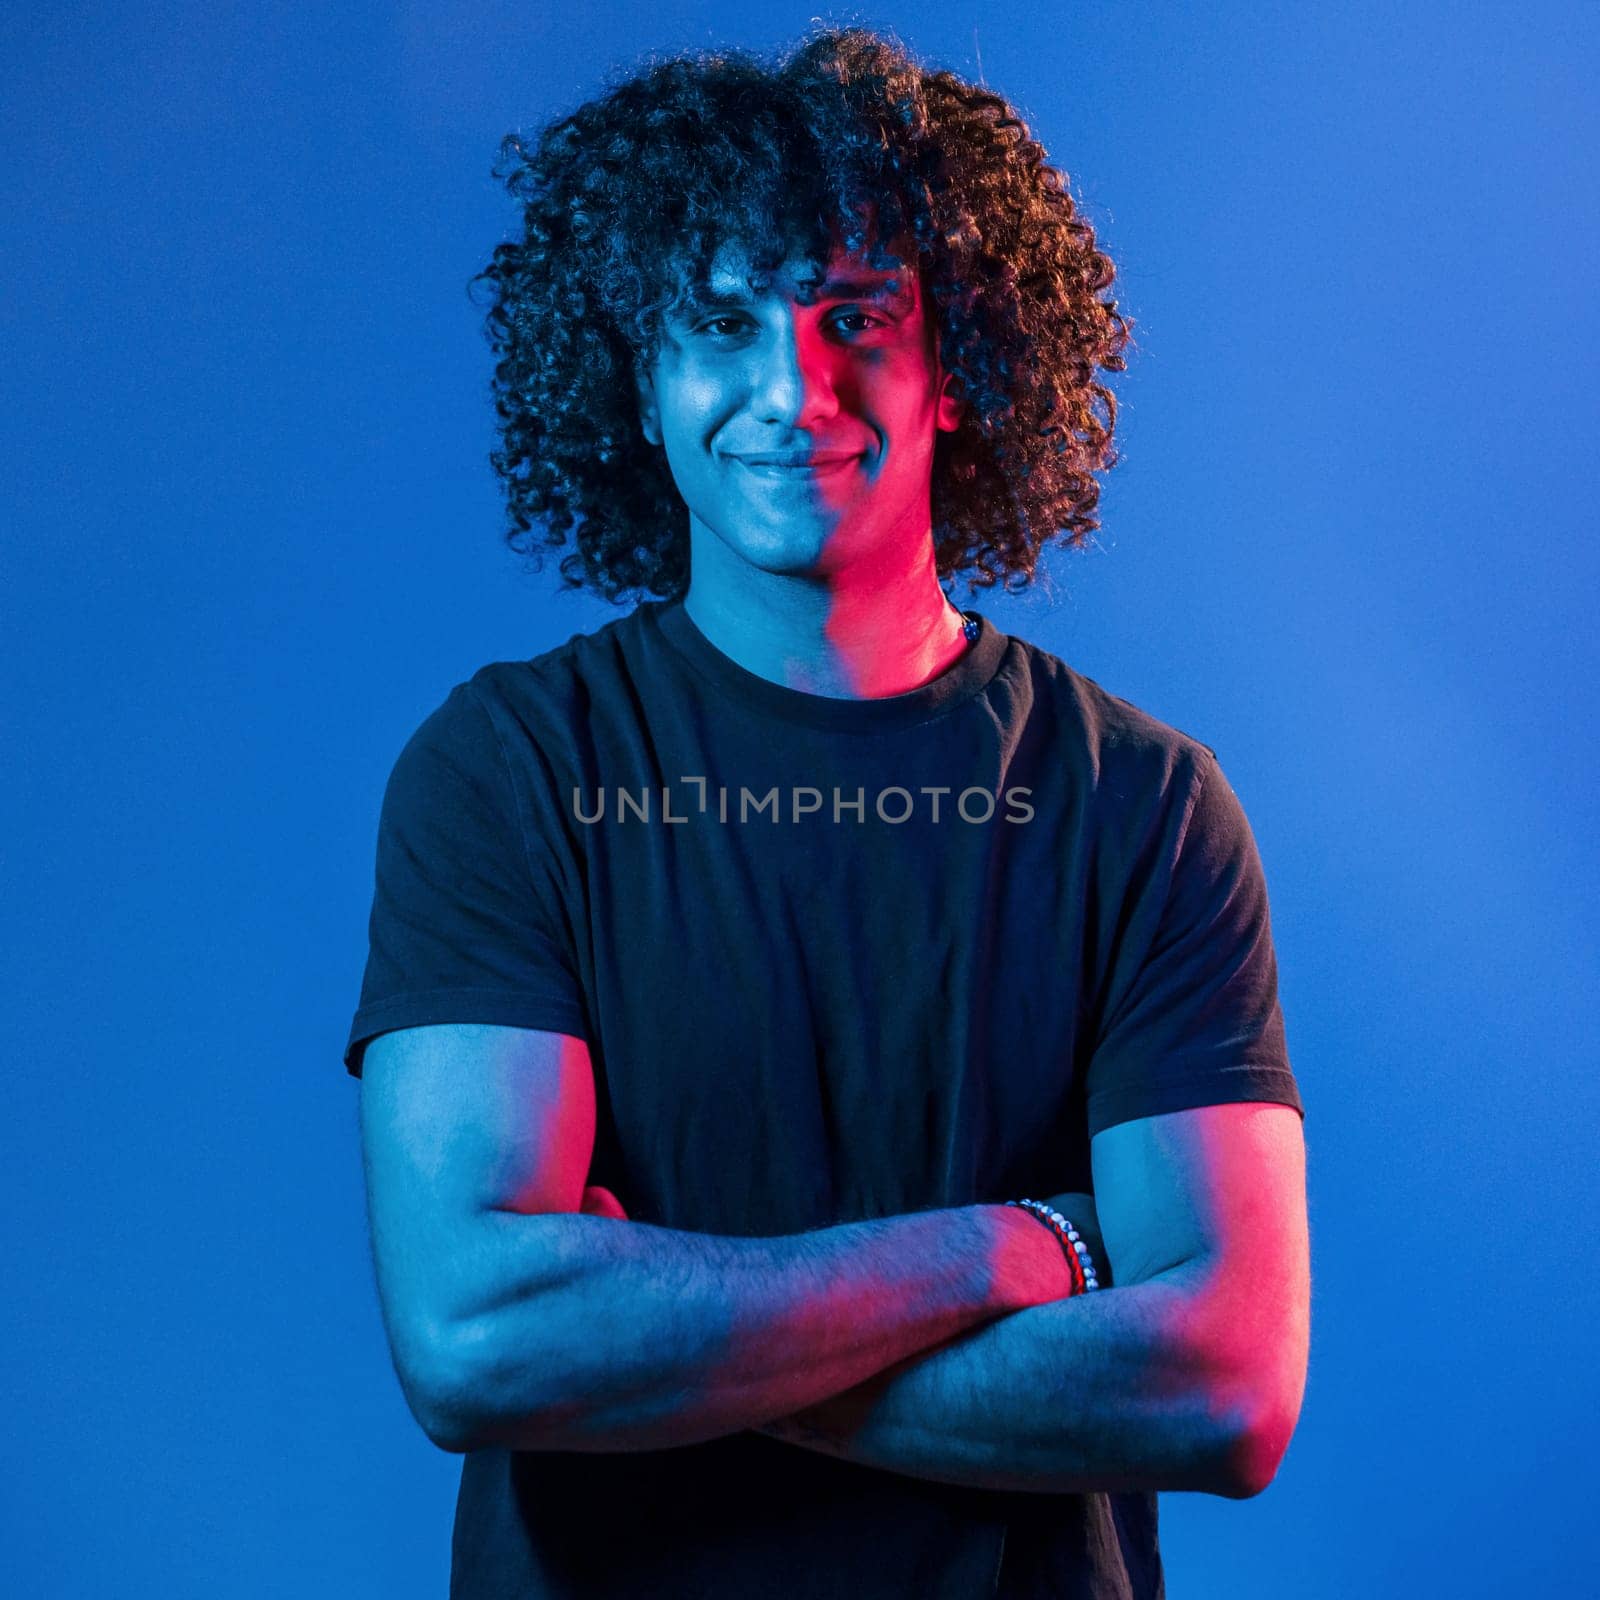 Posing for a camera. Young beautiful man with curly hair is indoors in the studio with neon lighting.